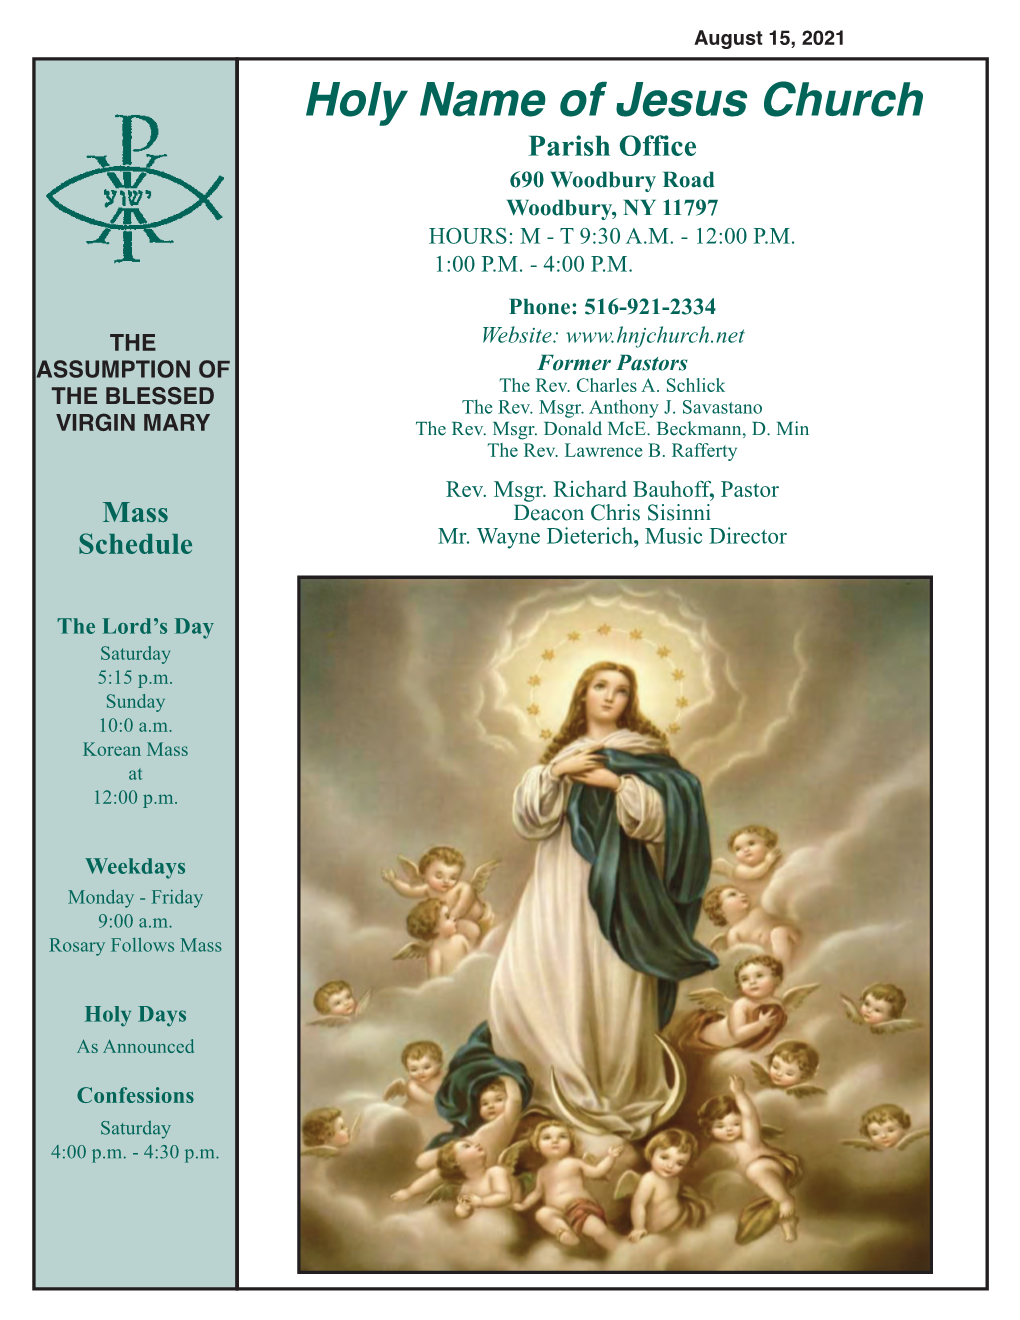 Holy Name of Jesus Church Page 2